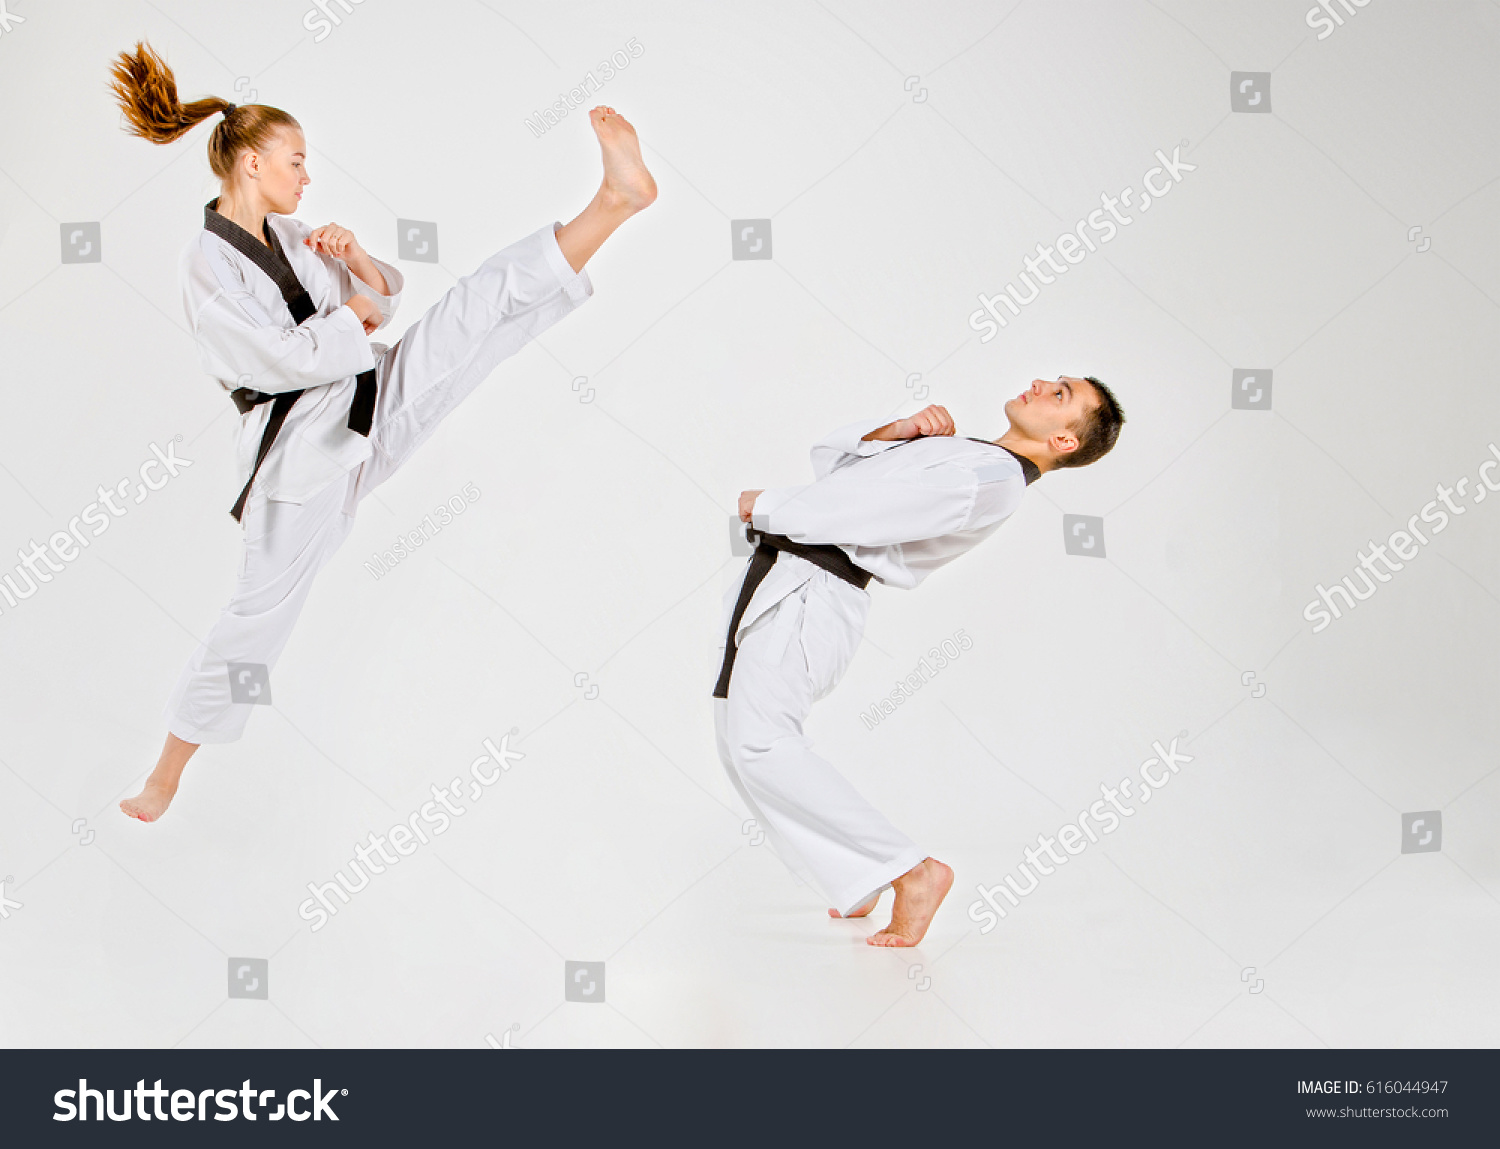 The karate girl and boy with black belts #616044947